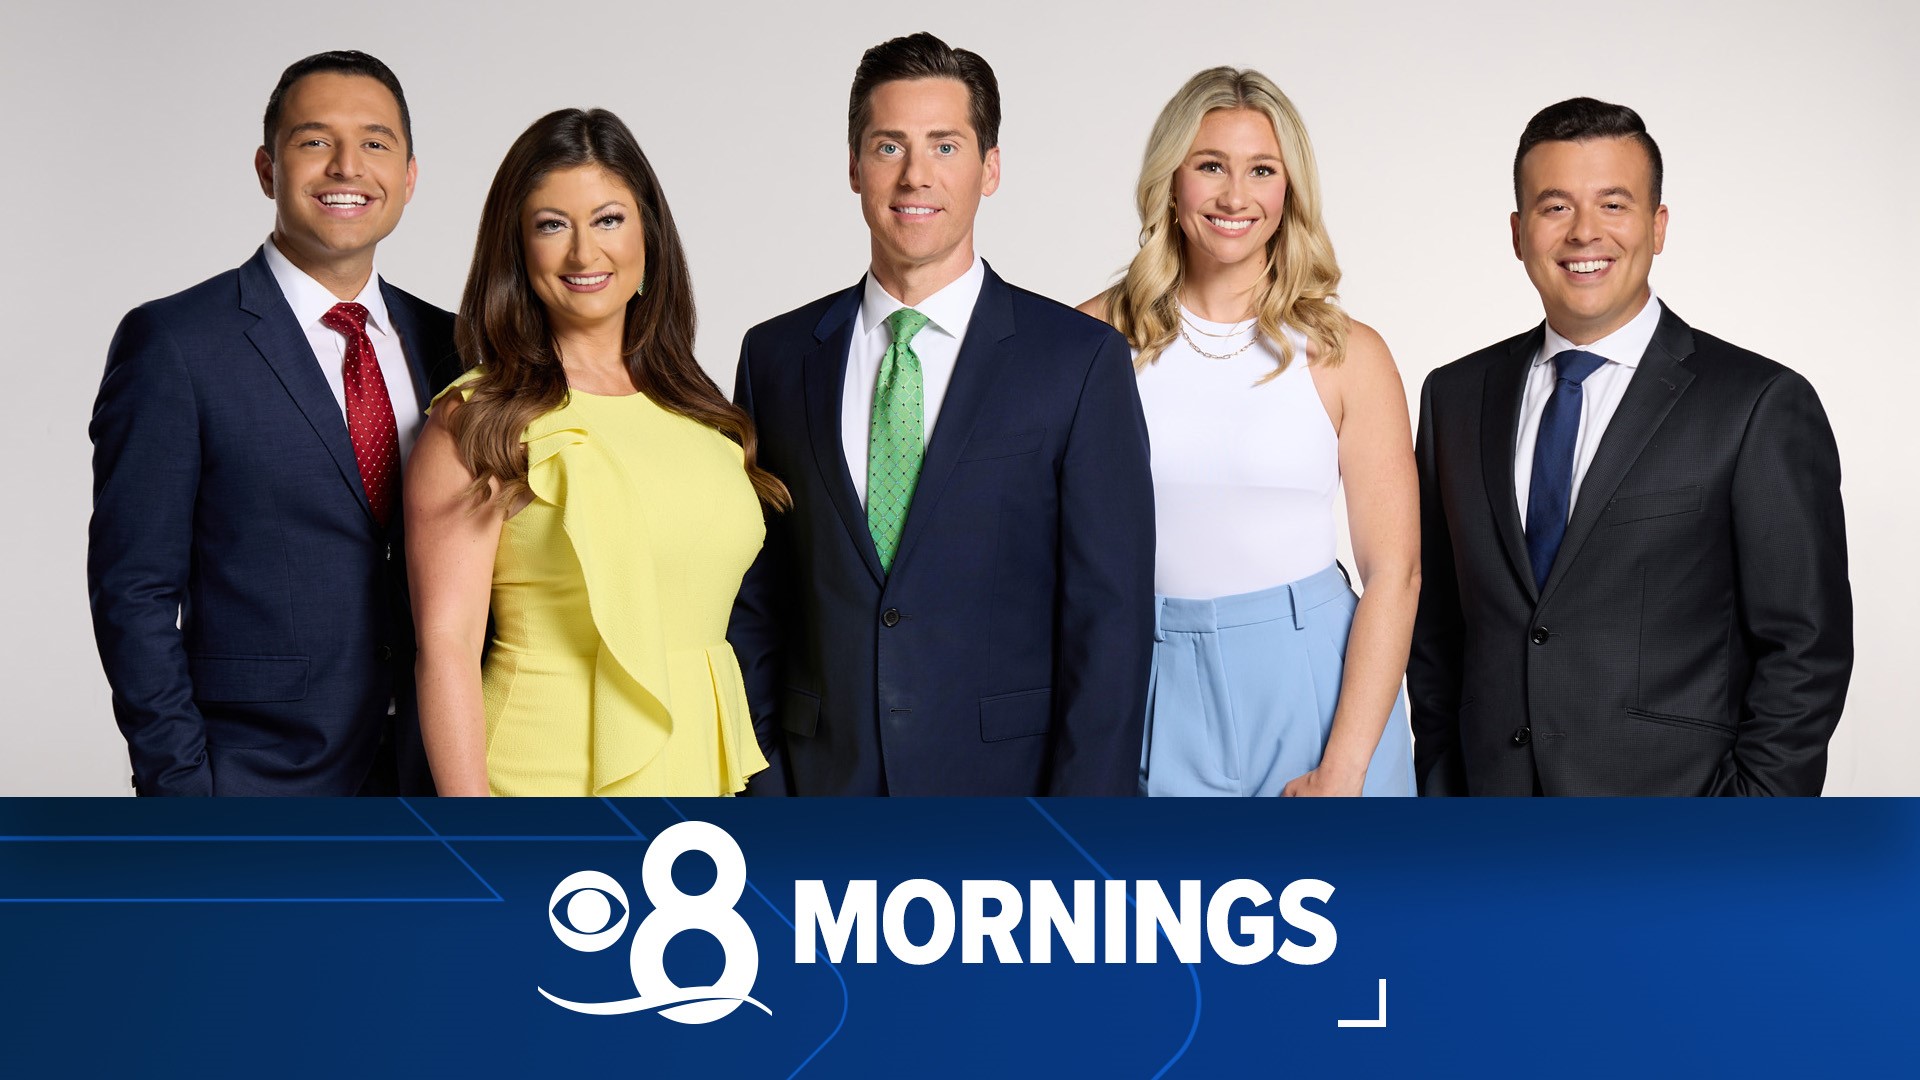 CBS 8 News gets you up to speed with what is happening today. Plus get up to the minute weather and discover new ways to enjoy San Diego.
